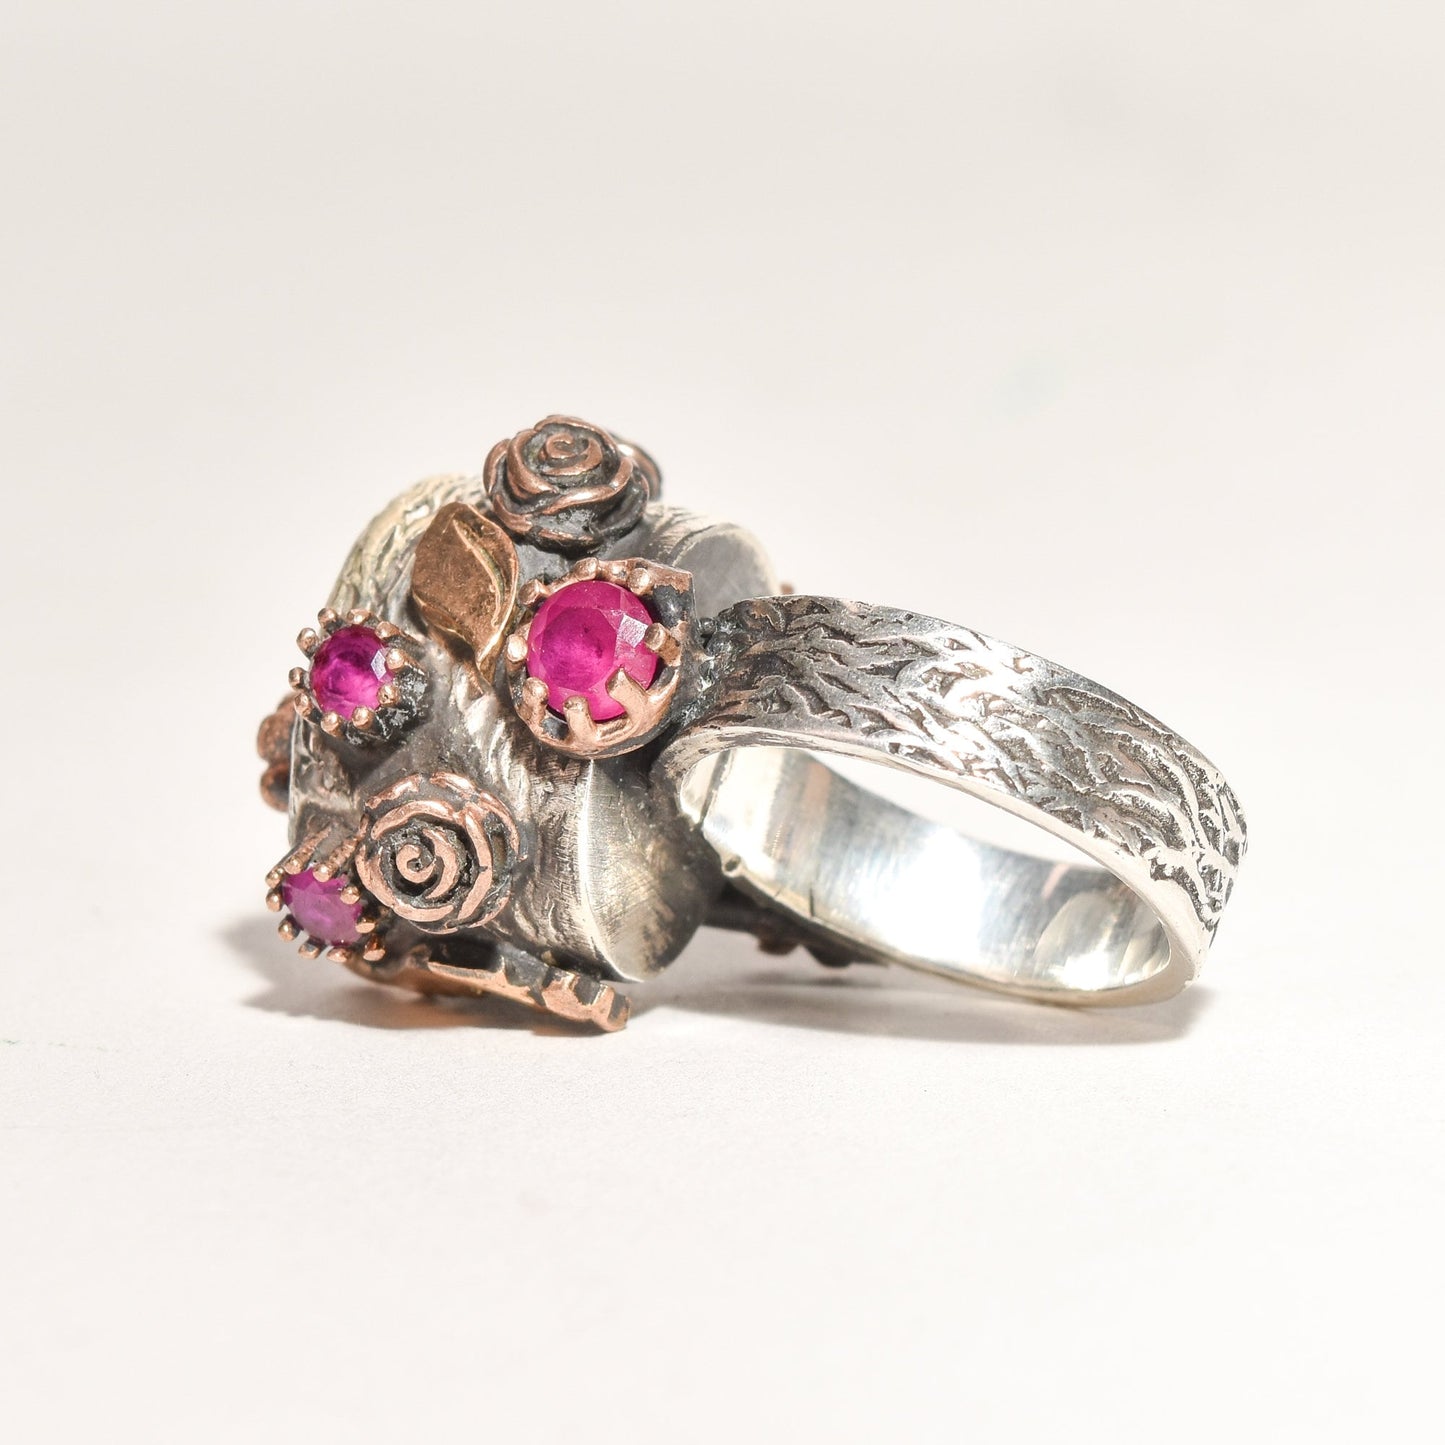 Brutalist sterling silver citrine ruby flower ring, two-tone statement ring size 6.25 US, with detailed metalwork and gemstone accents.